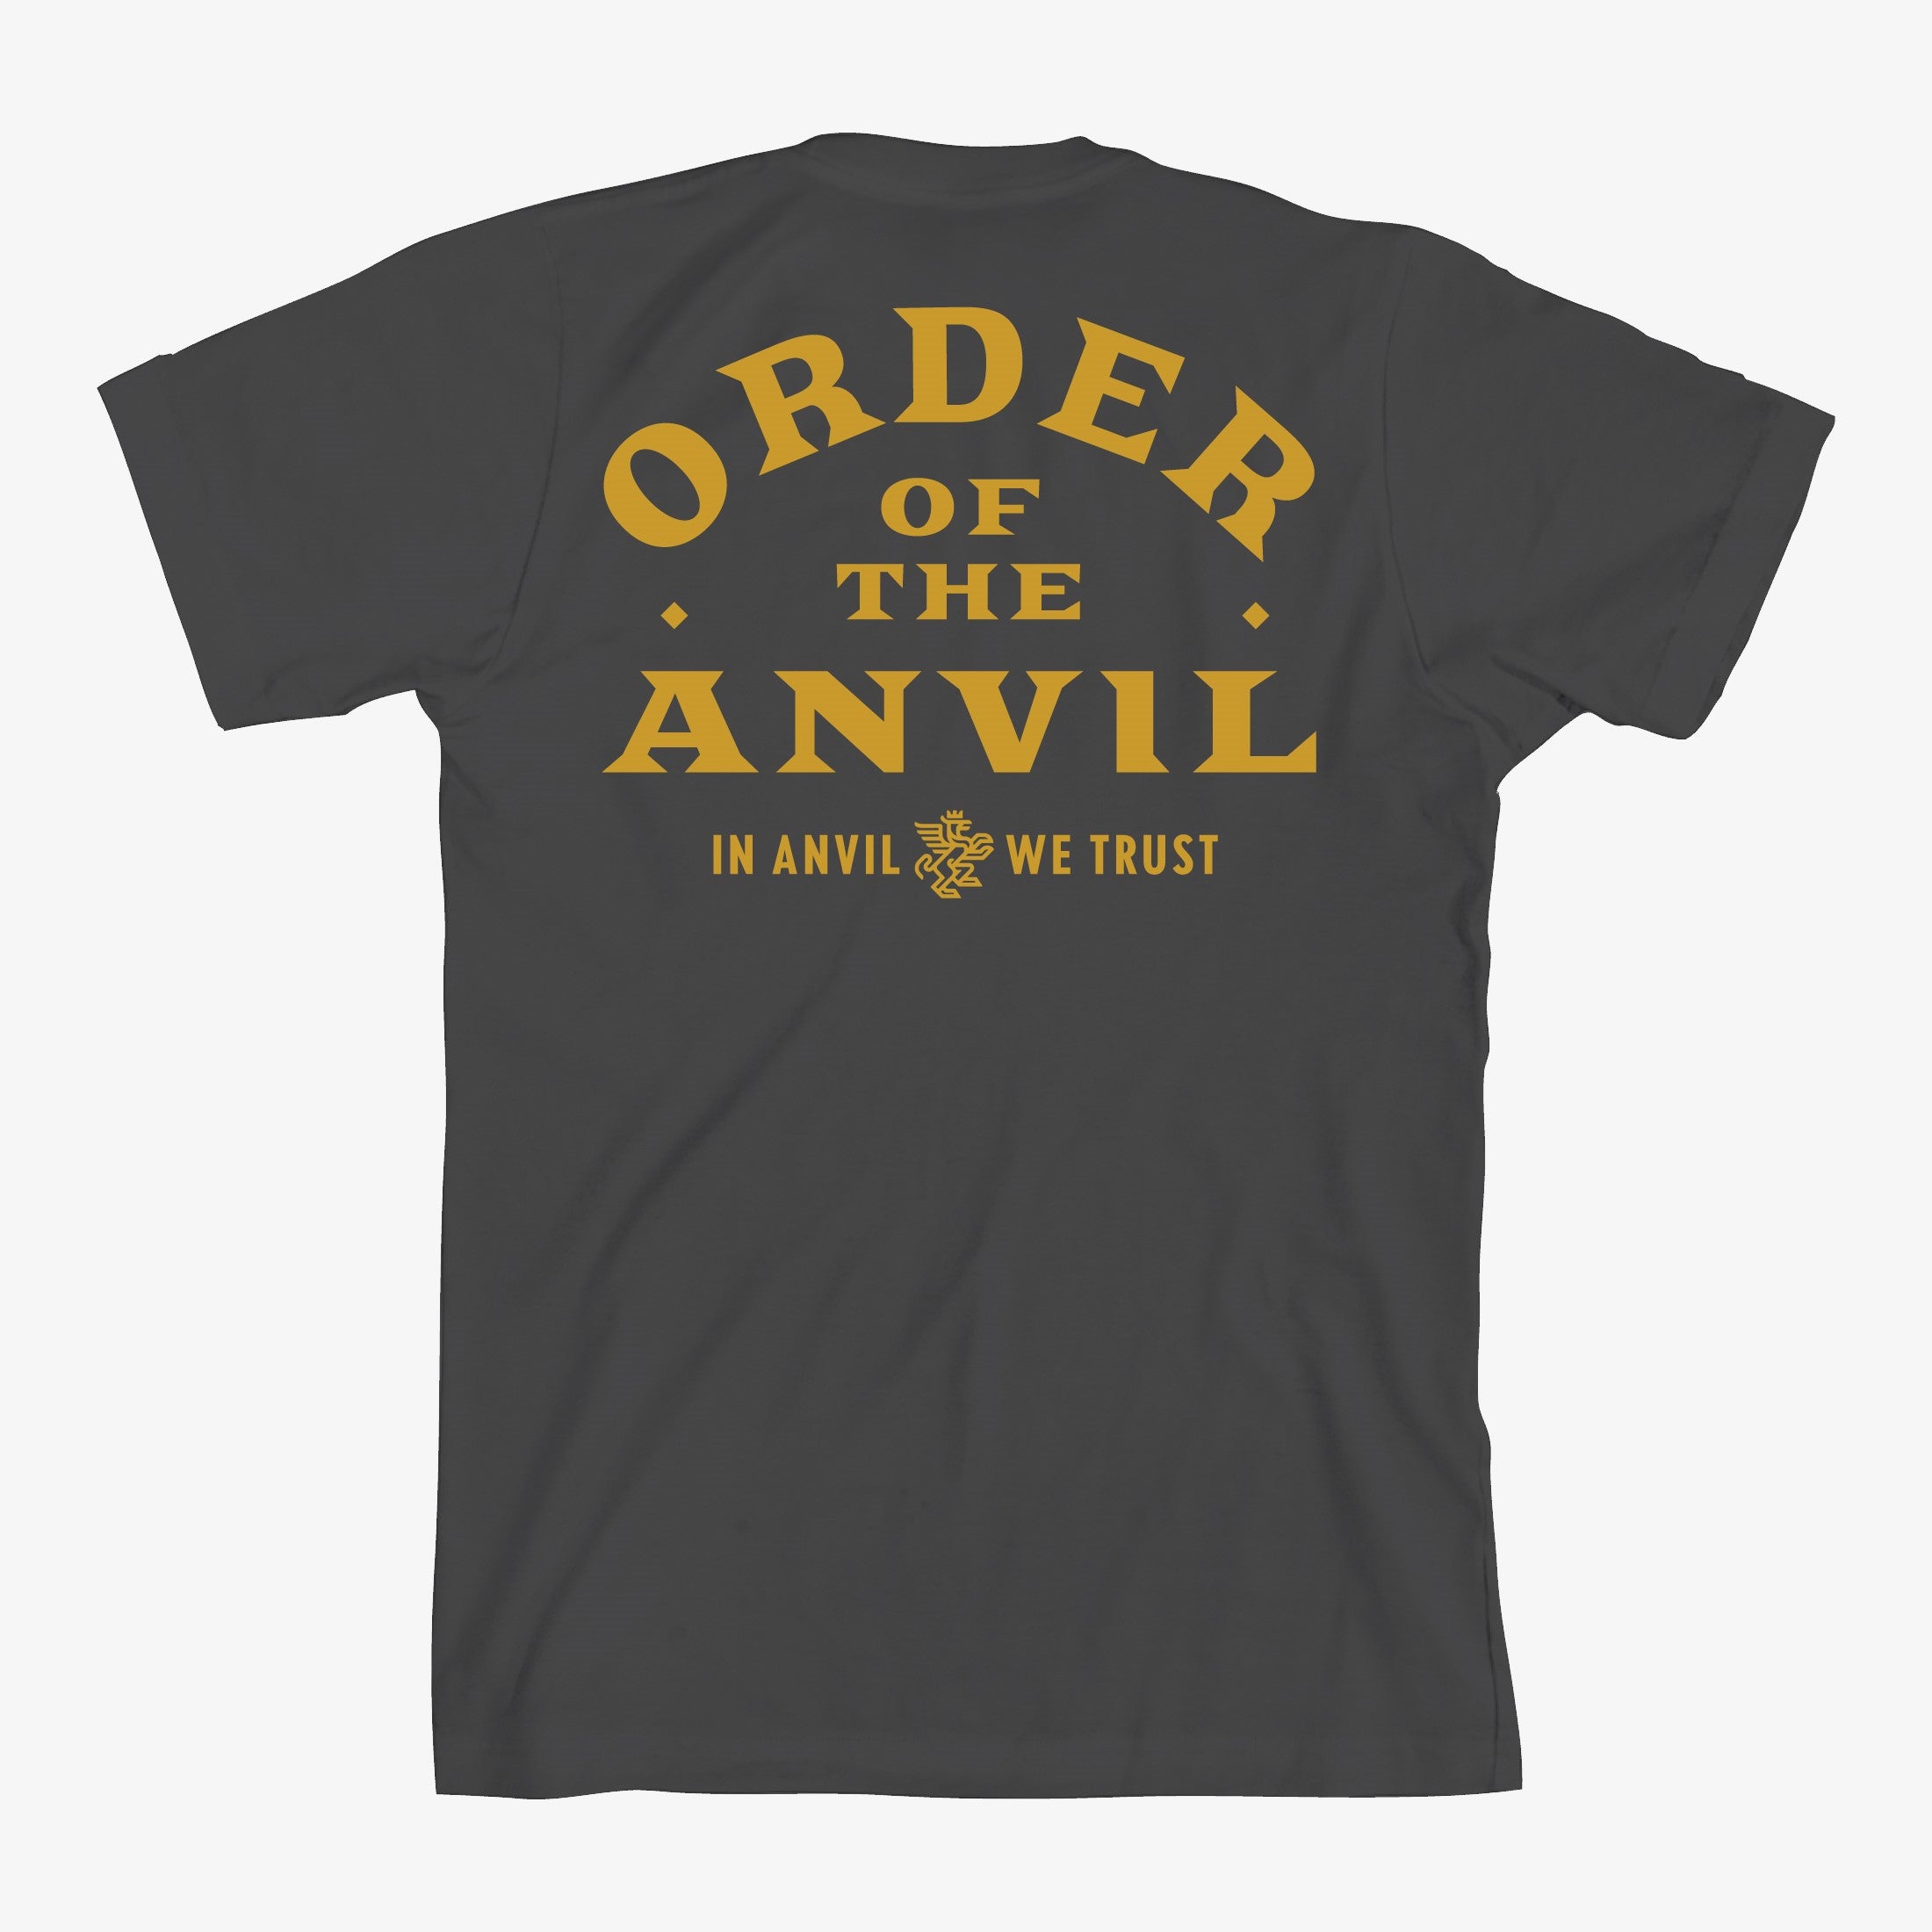 Order of the Anvil Tee - Trust - AleSmith Brewing Co.